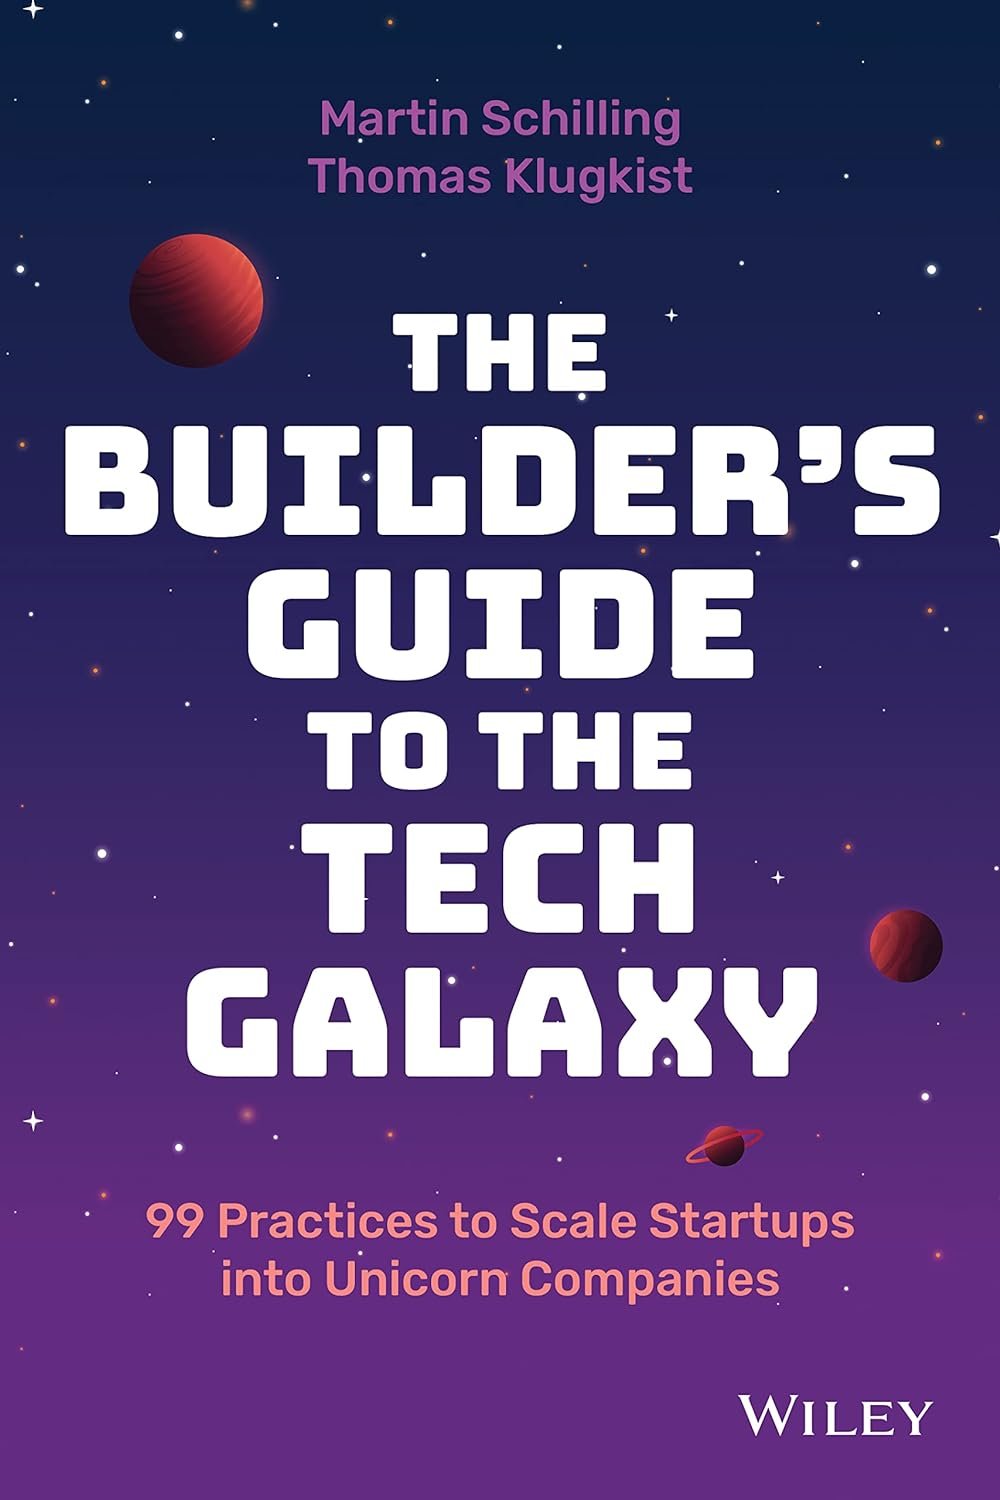 The Builder's Guide to the Tech Galaxy / Martin Schilling & Thomas Klugkist (Wiley, 2022)